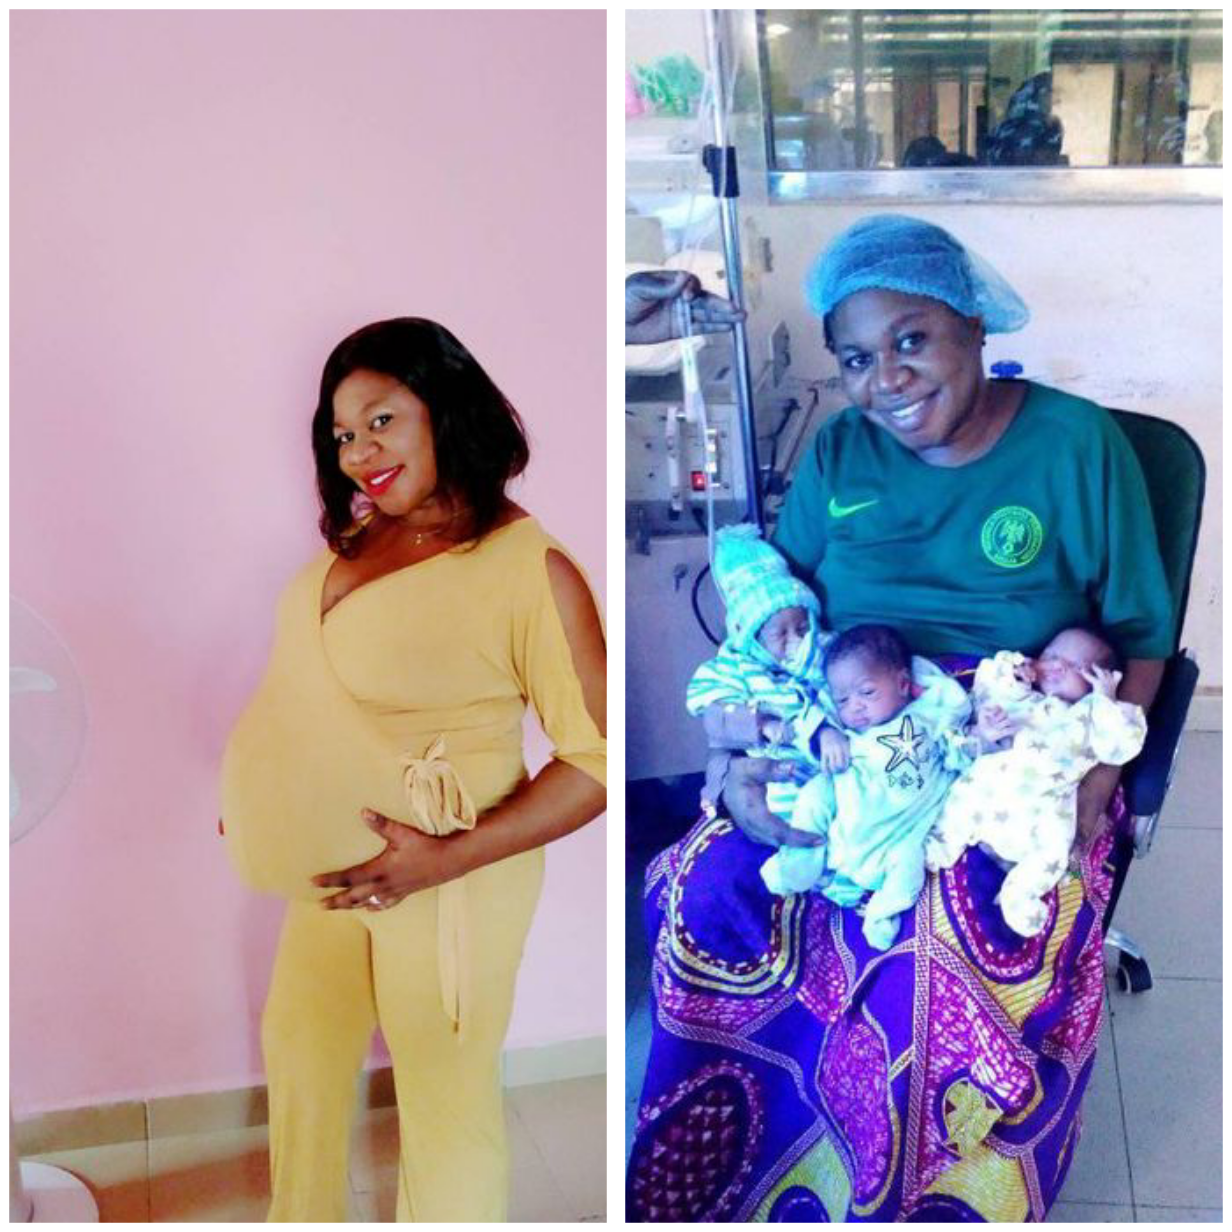 Nigerian woman delivers triplets "after 9 years of name-calling and insults"